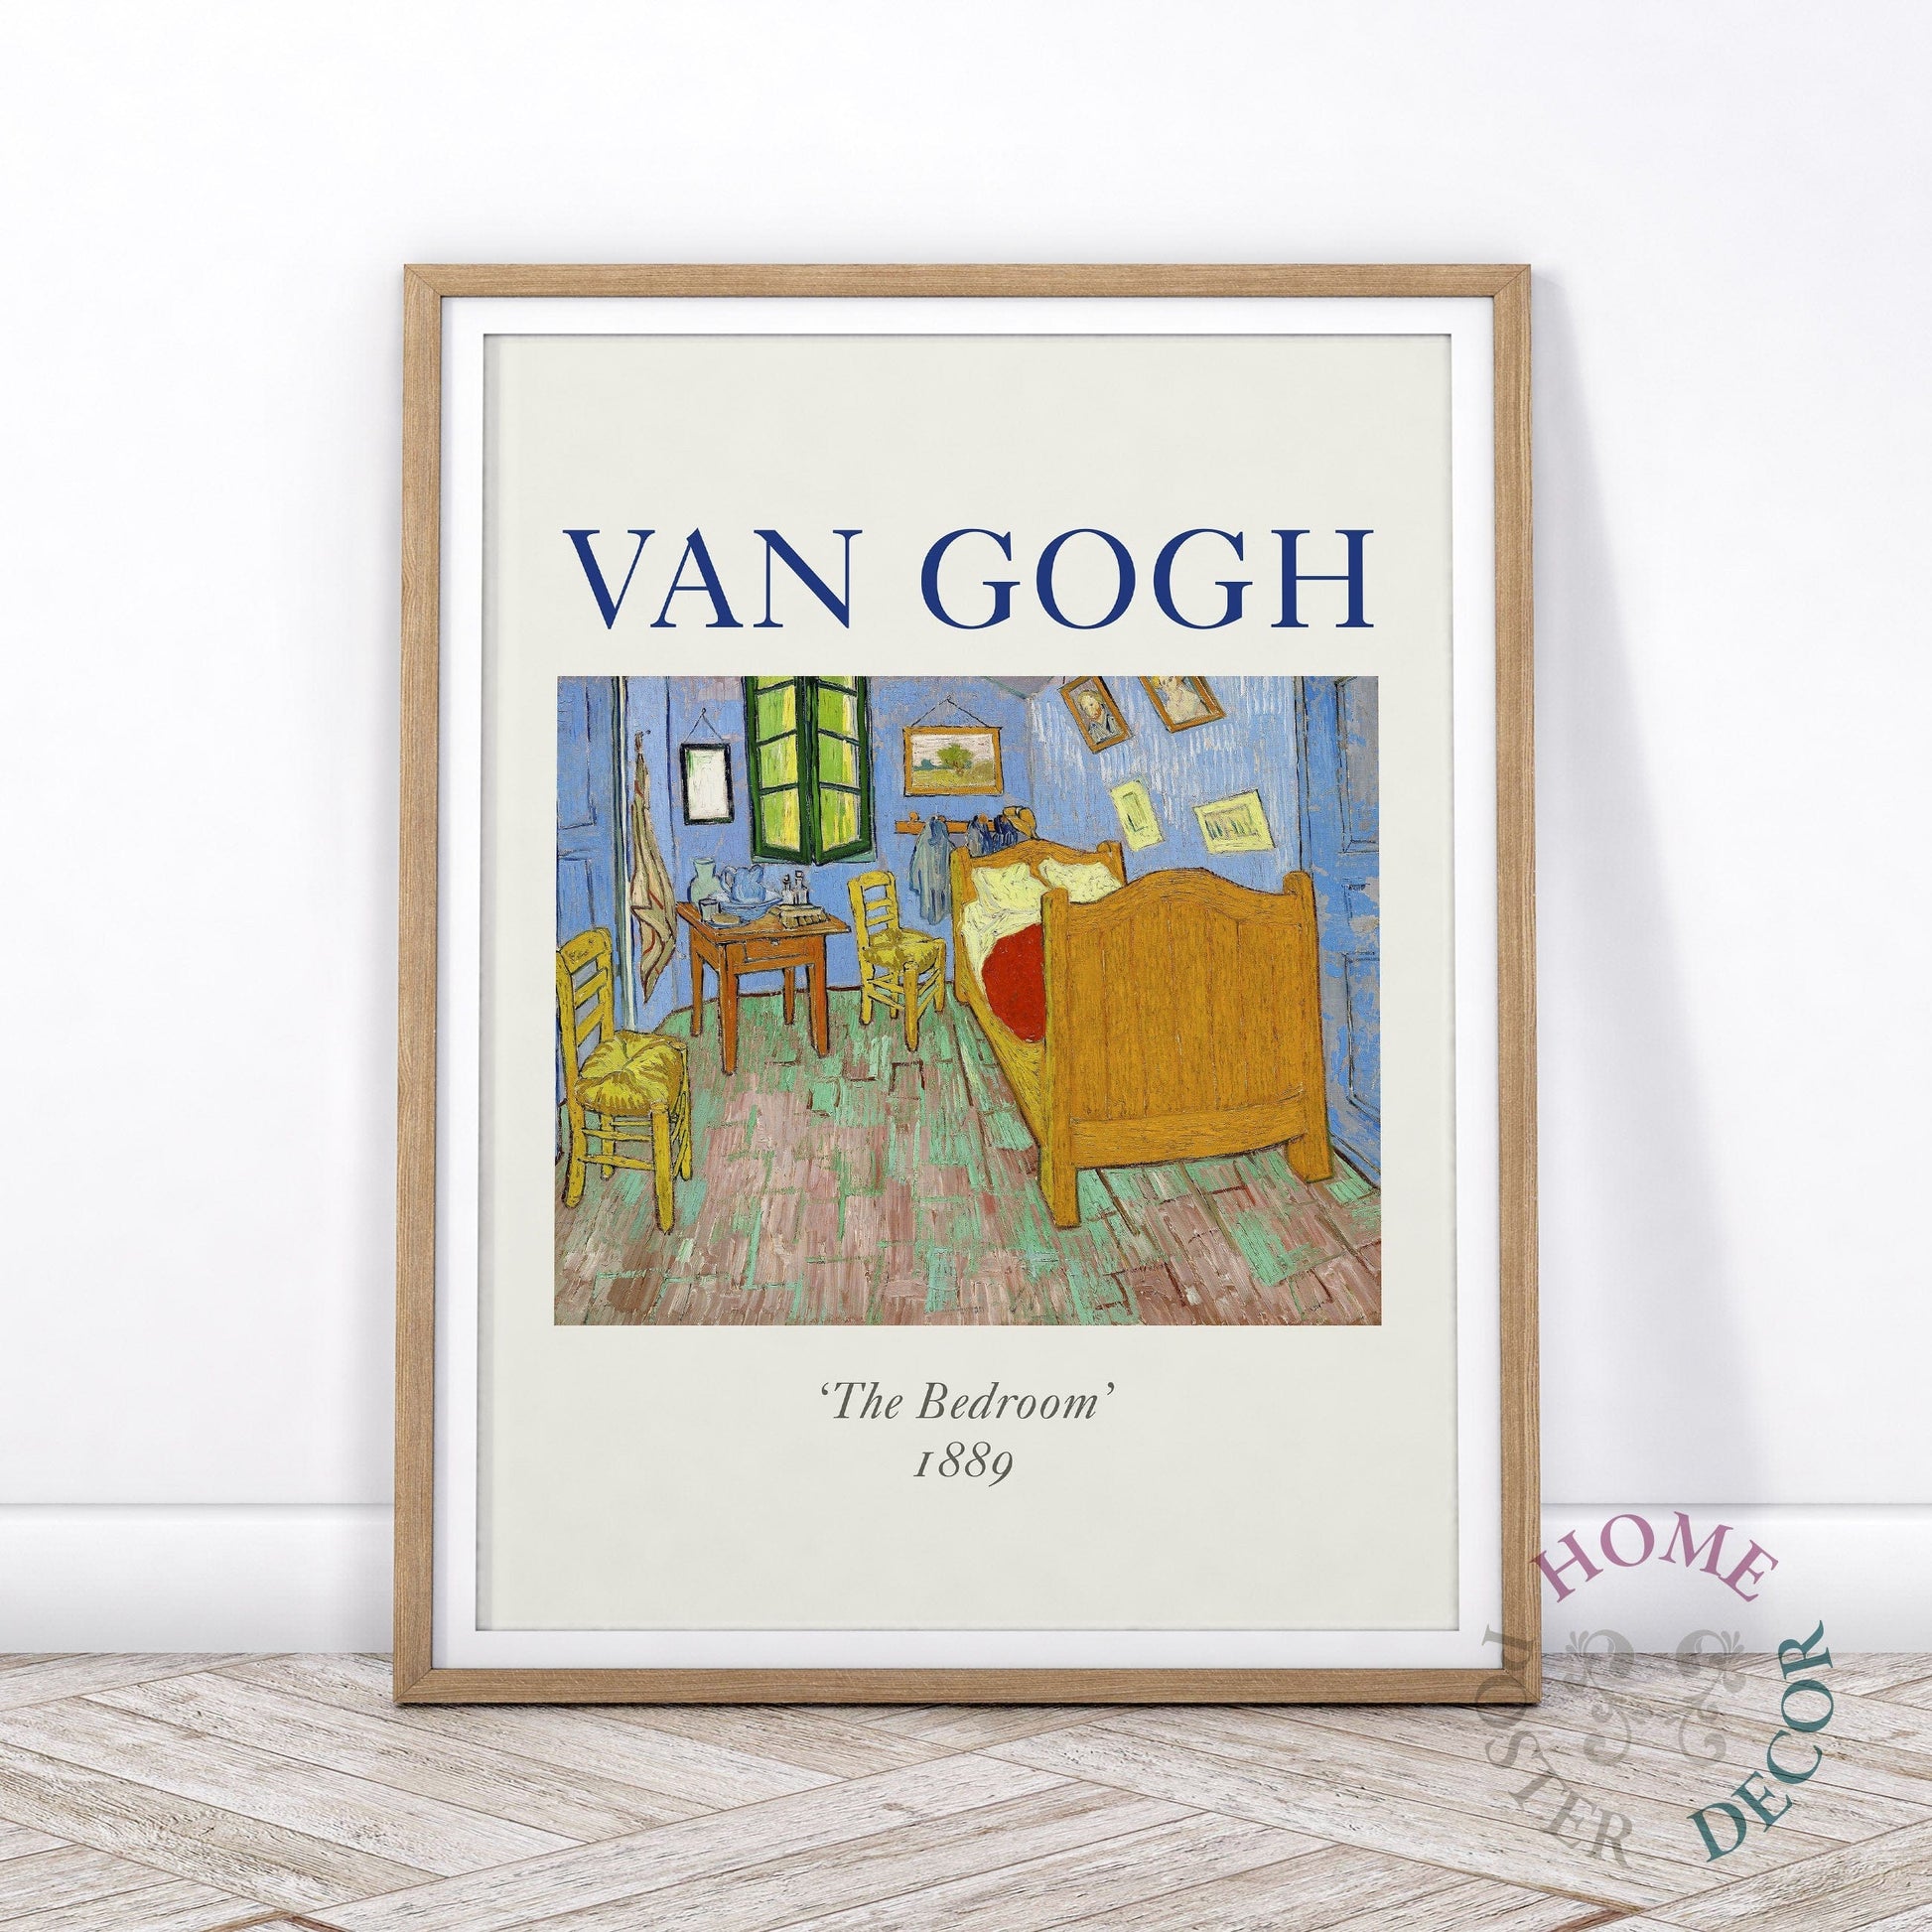 Home Poster Decor The Bedroom, Van Gogh Painting, Van Gogh Print, Famous Painting, Post-impressionist, Christmas Gift, Exhibition Poster, Museum Quality Print